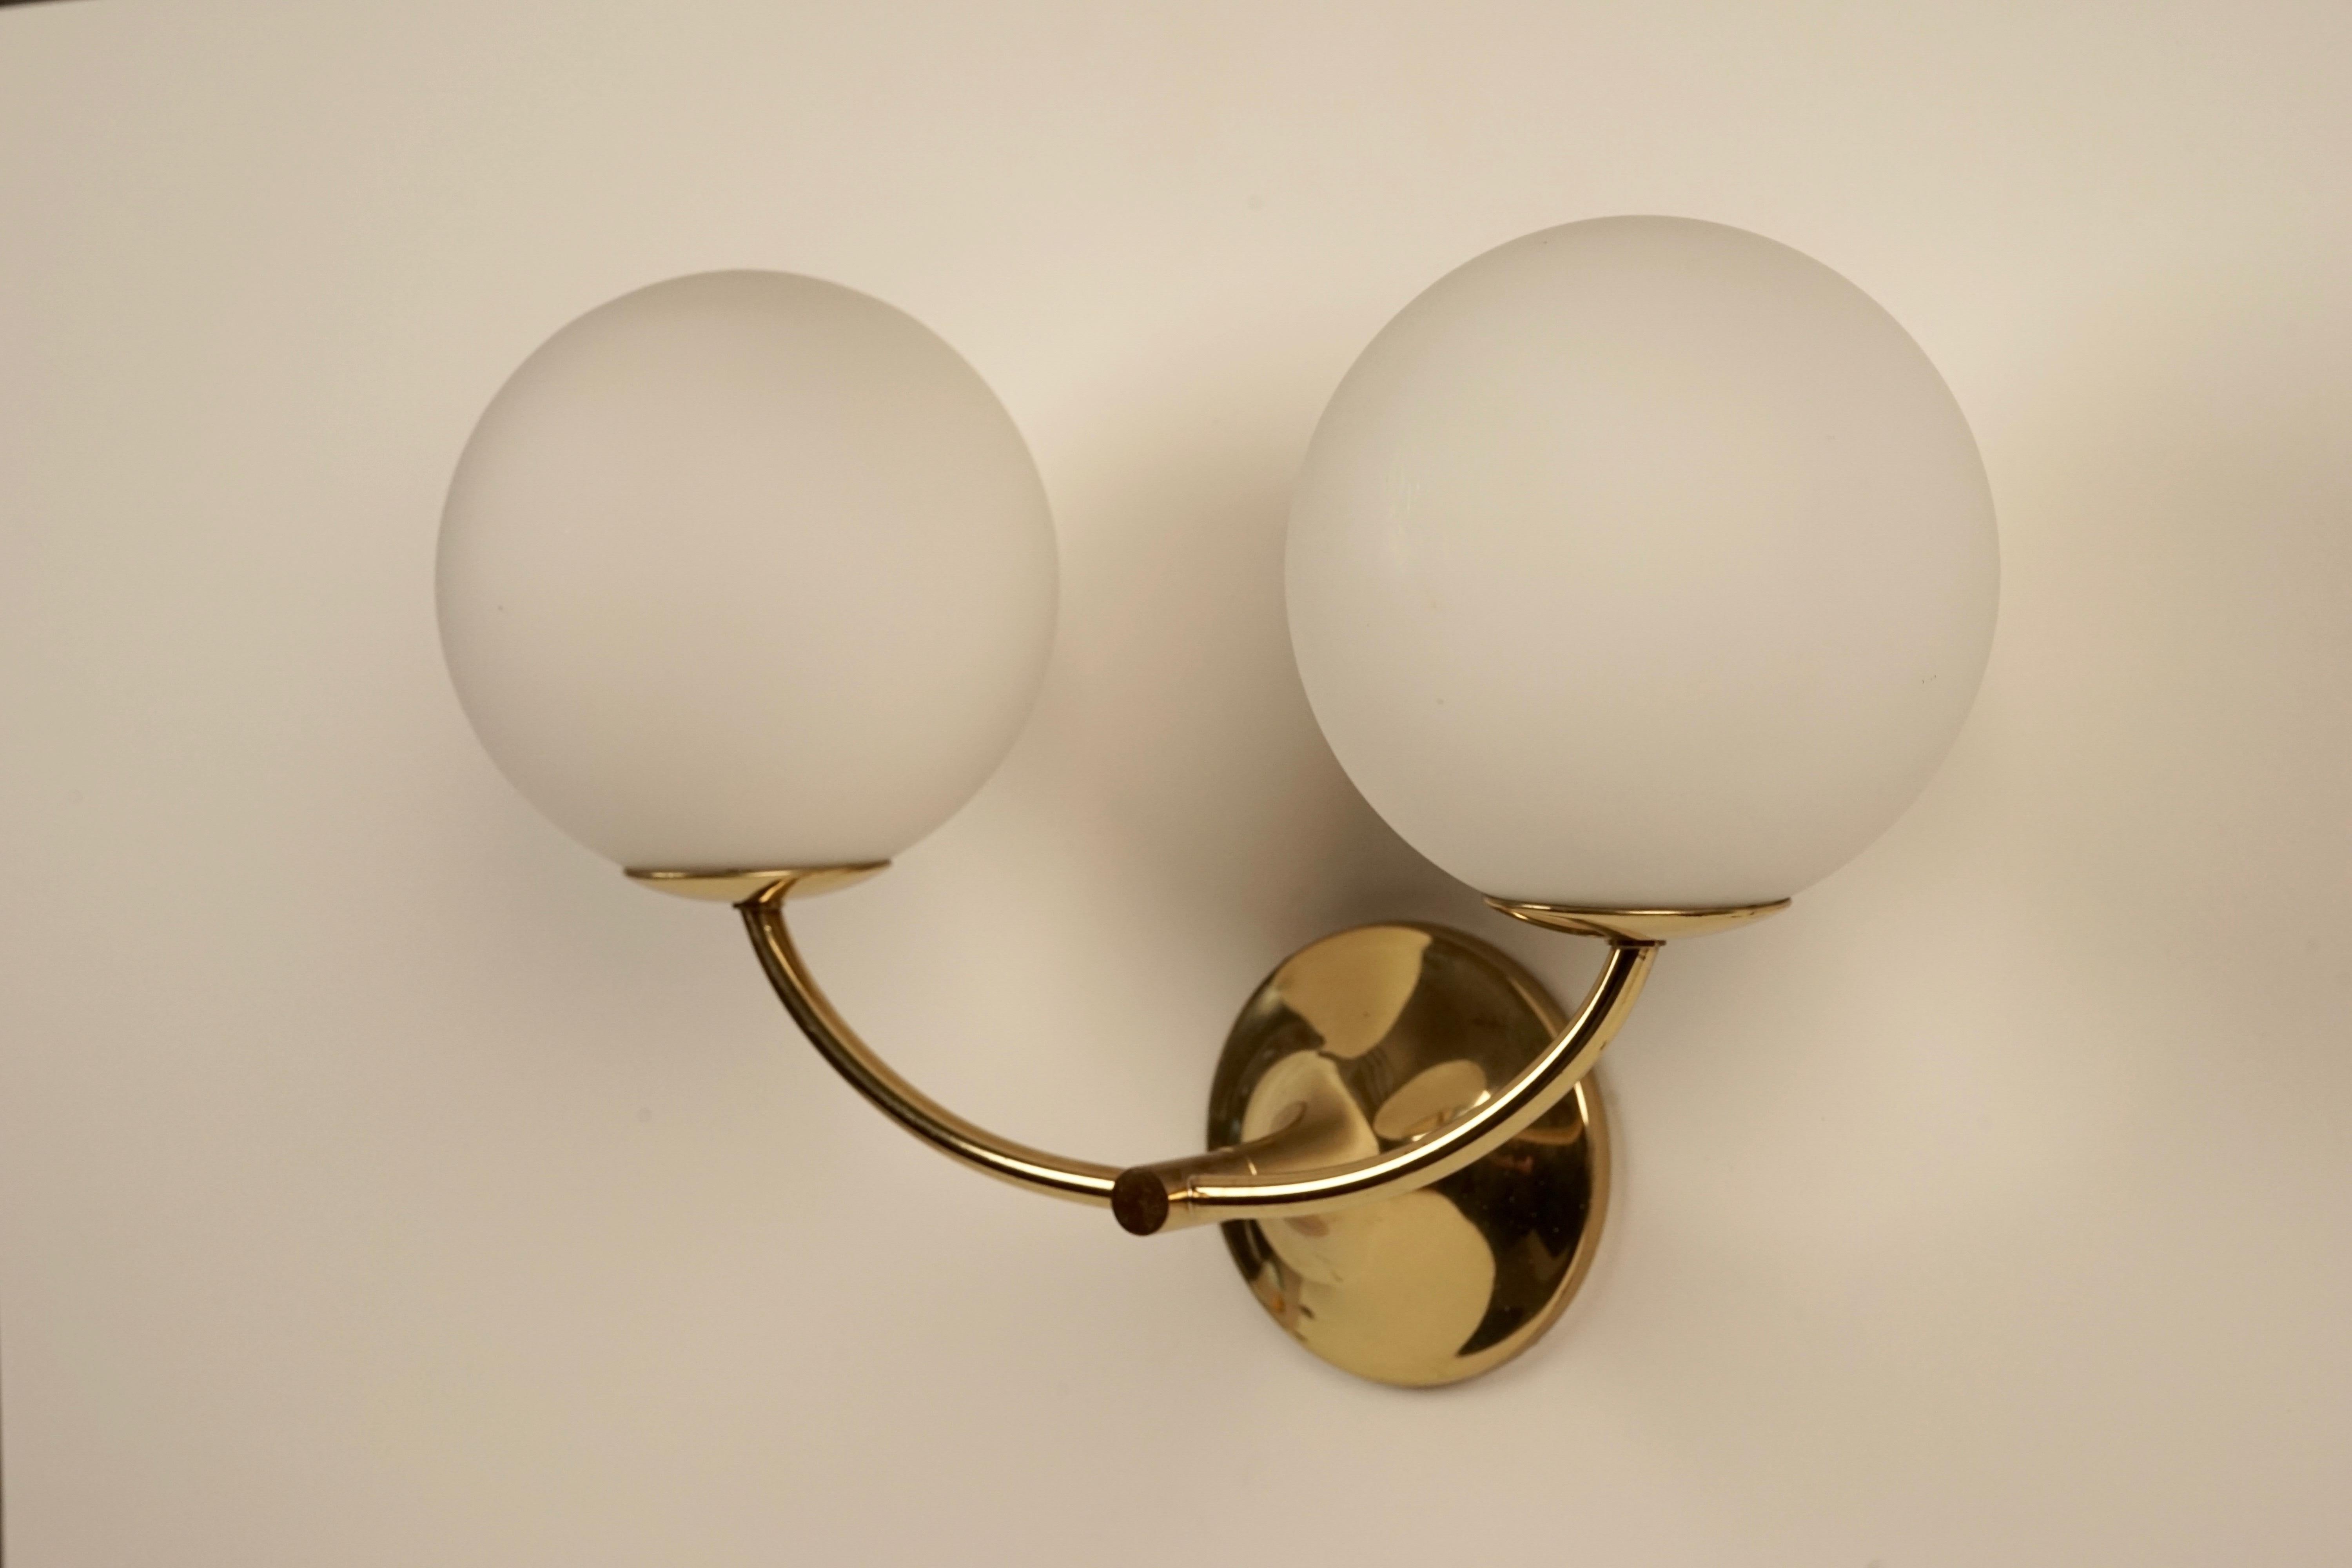 A Max Bill wall lamp composed of two hand blown opaline glass globes mounted on an elegant brass body.
The globes are fitted with metal threads which enable easy removal.